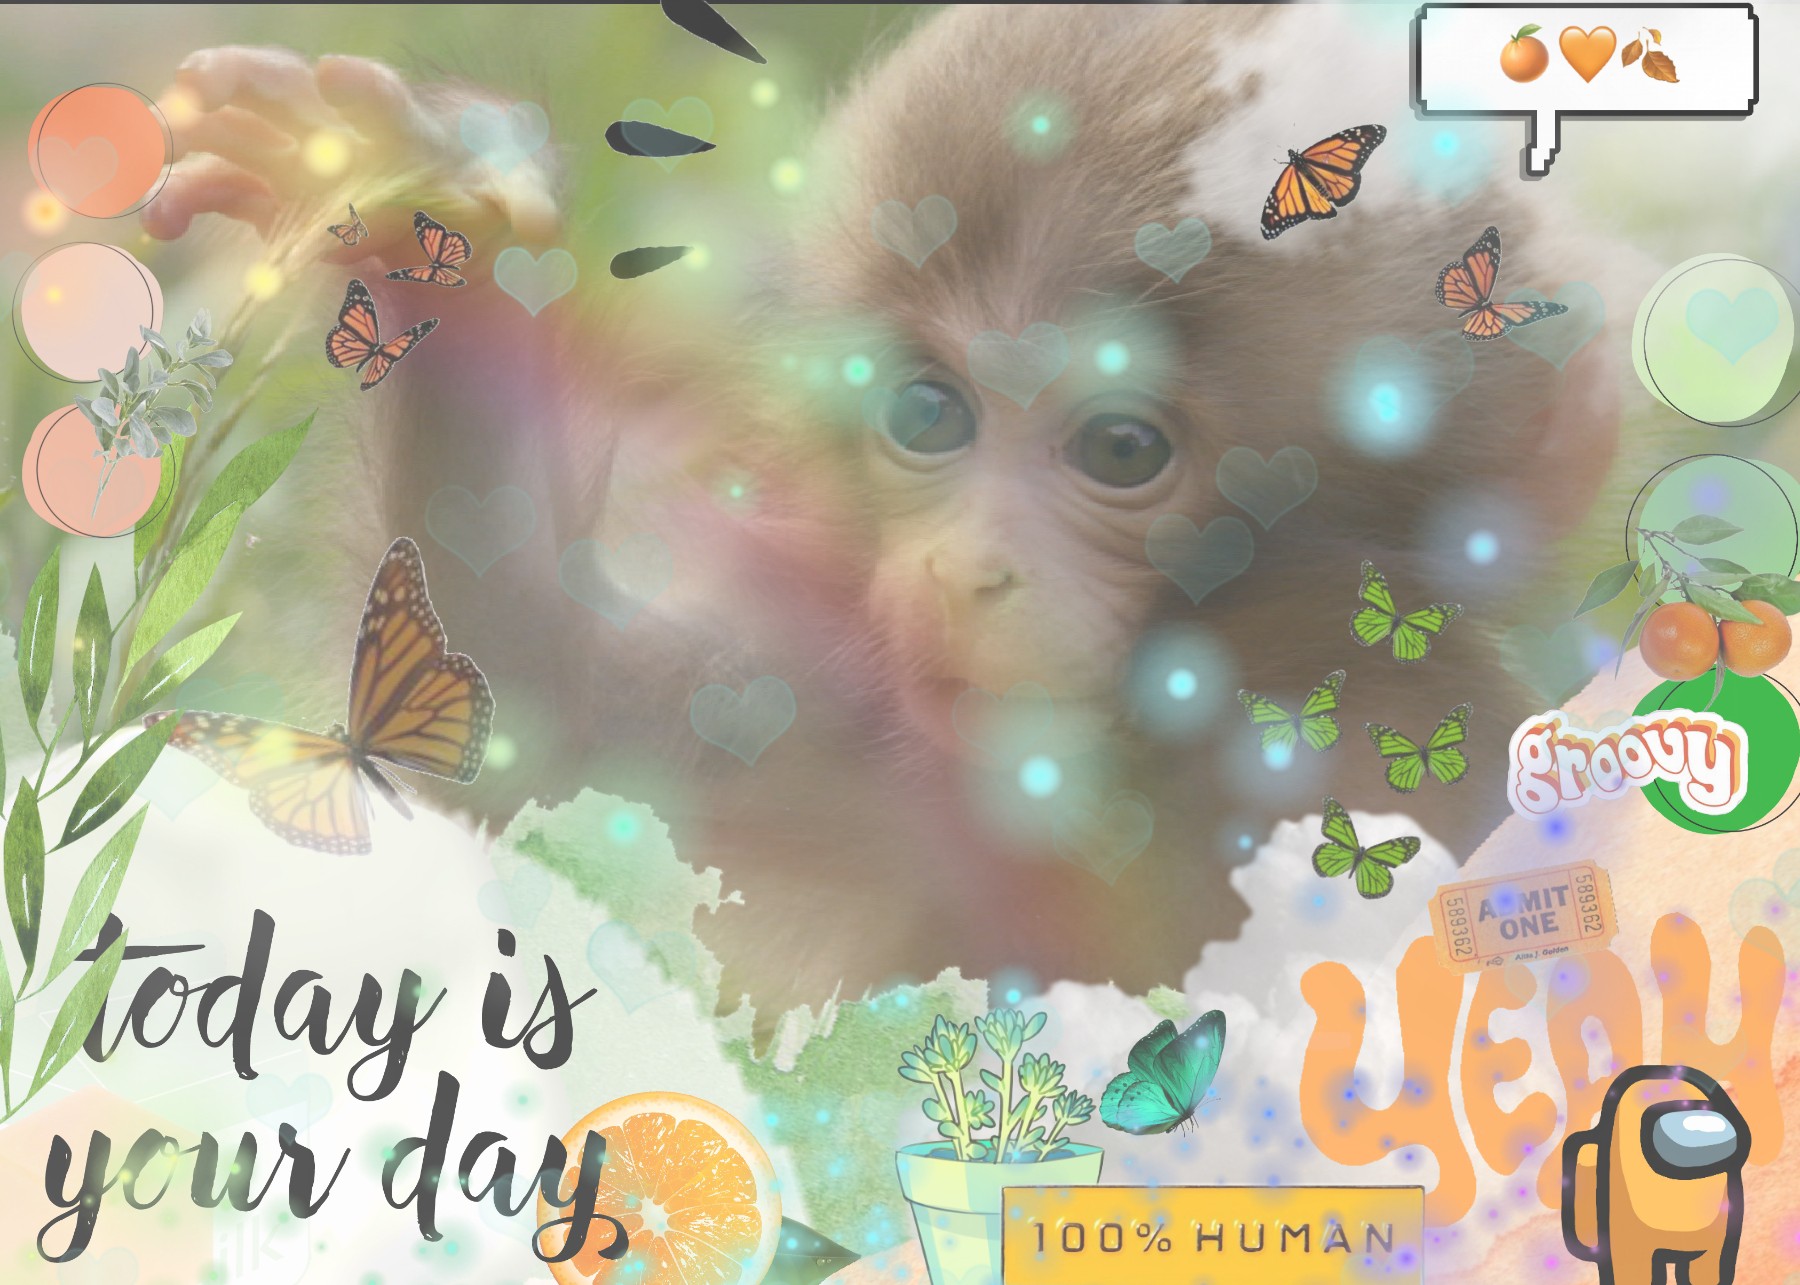 🍊🐵💚

Aesthetic Monkey

a little over edited buts that's ok 👍 